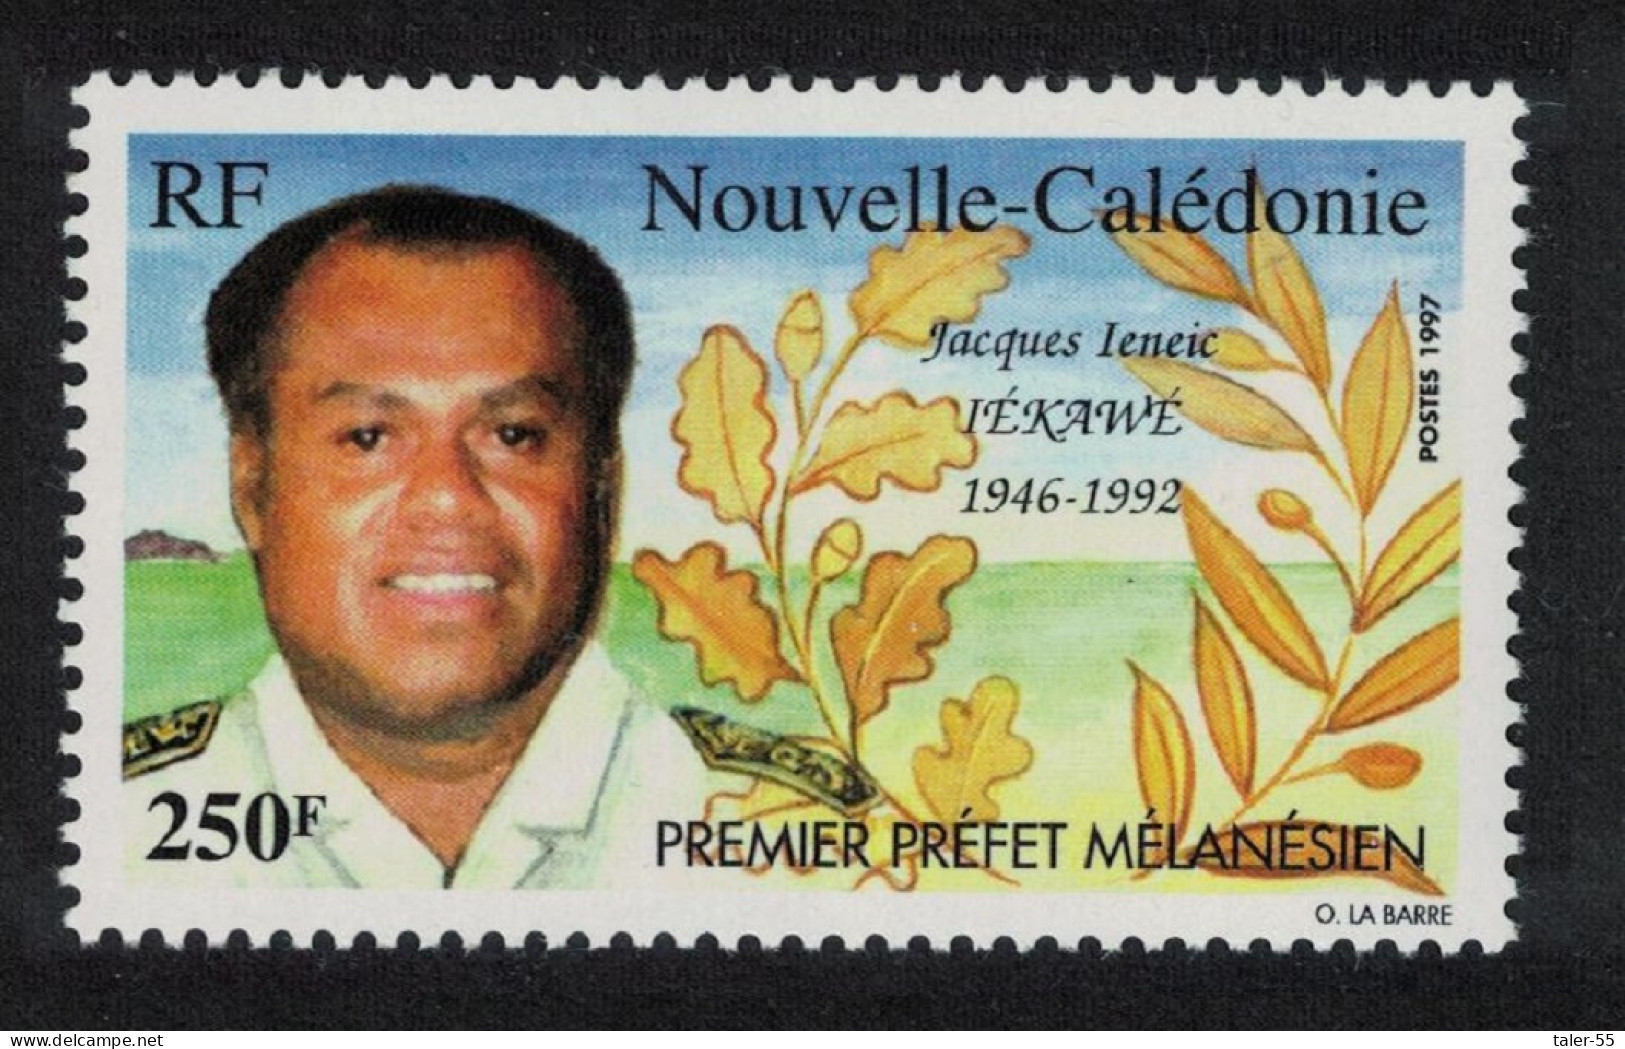 New Caledonia Jacques Ieneic Iekawe First Melanesian Prefect 1997 MNH SG#1102 - Unused Stamps